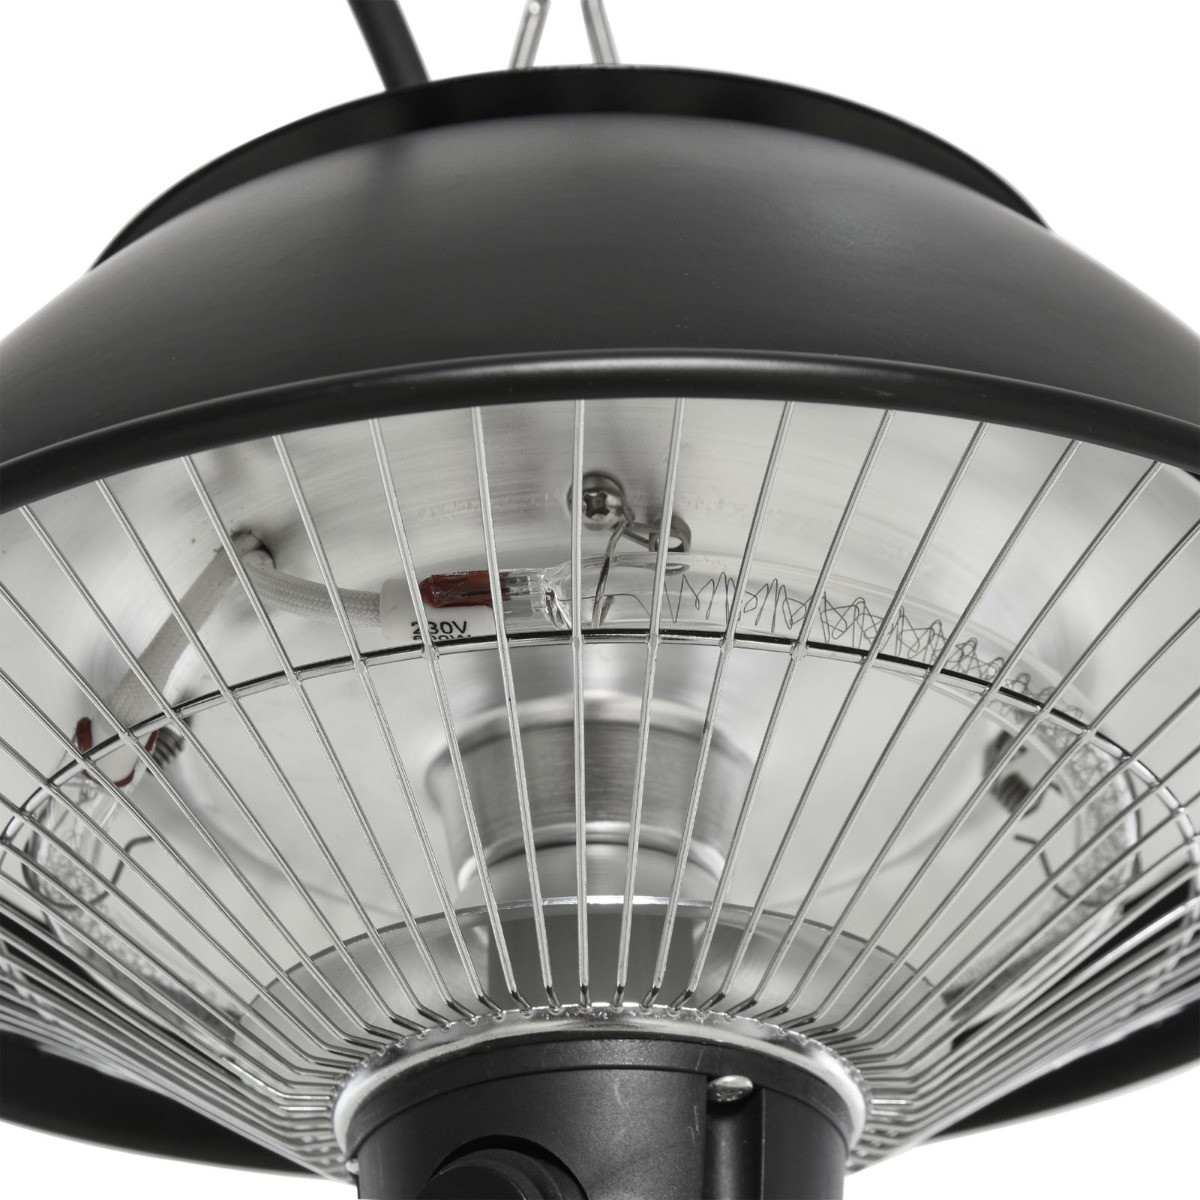 Outsunny Hanging Electric Halogen Heater Light, 600W - Black>